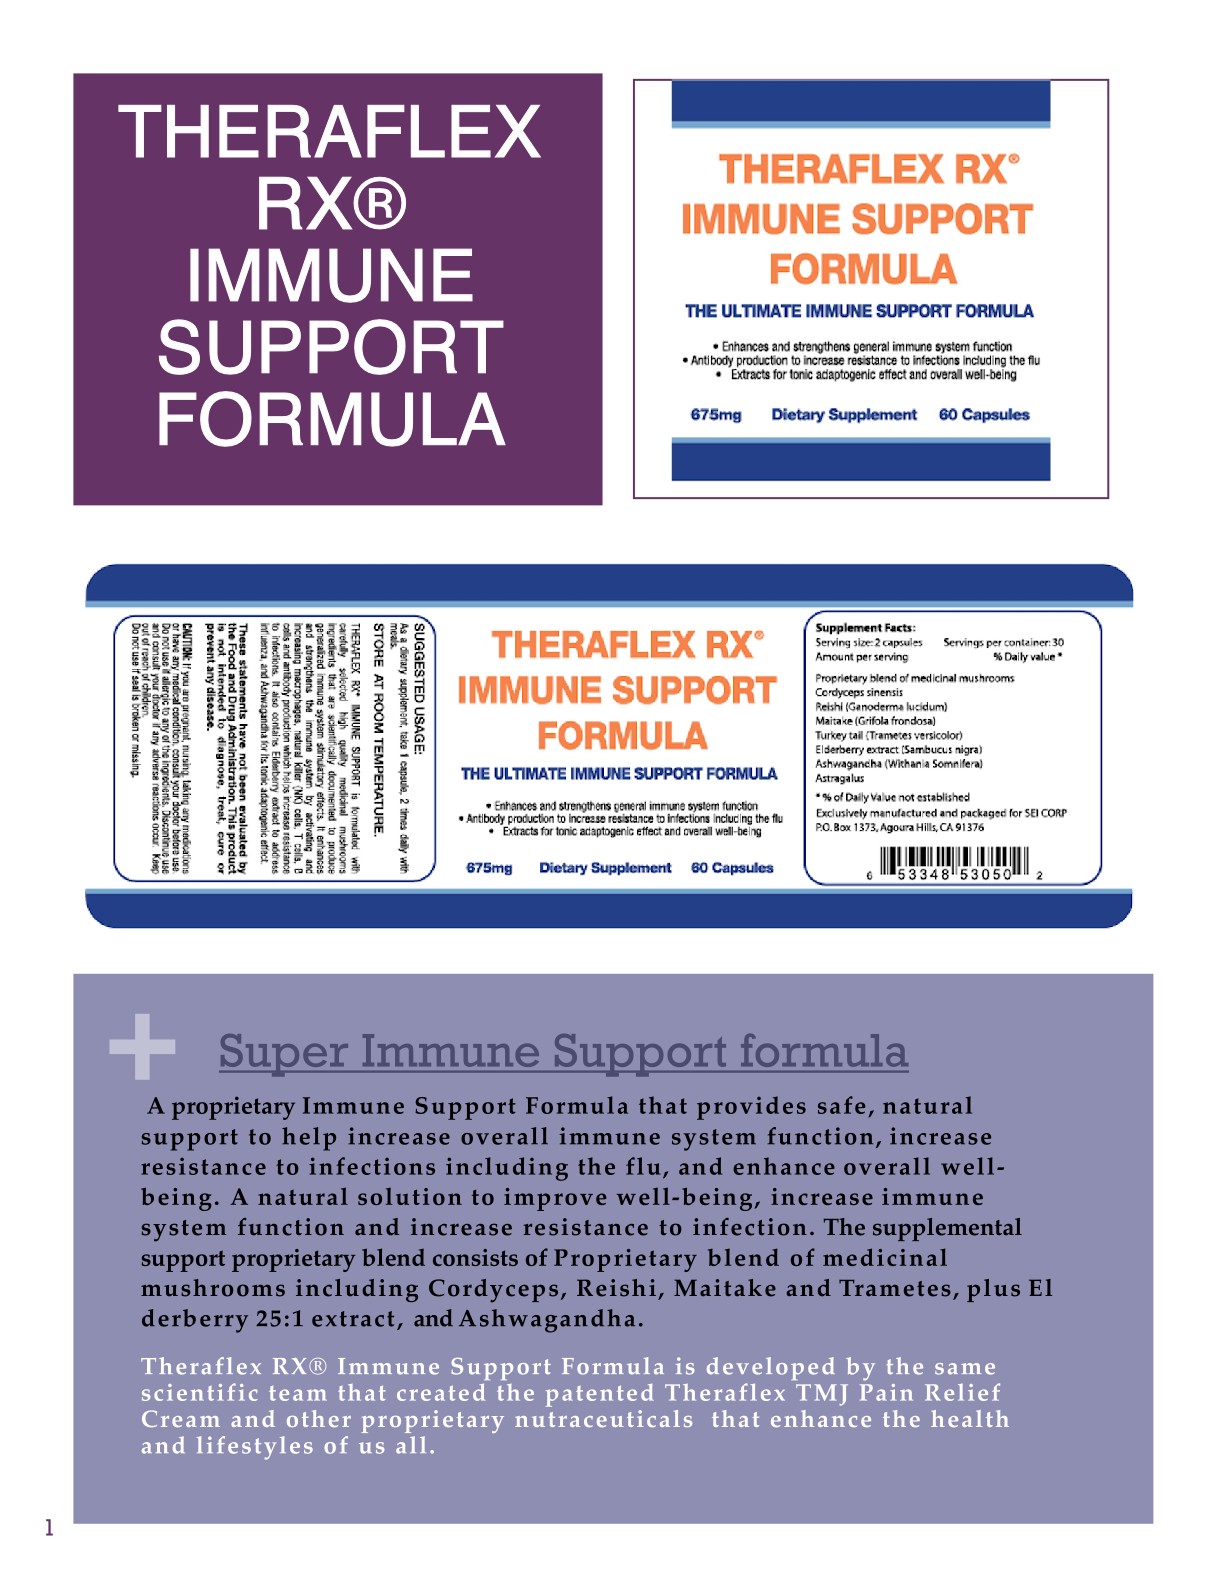 THERAFLEX RX IMMUNE SUPPORT BROCHURE WITHOUT PICS_1